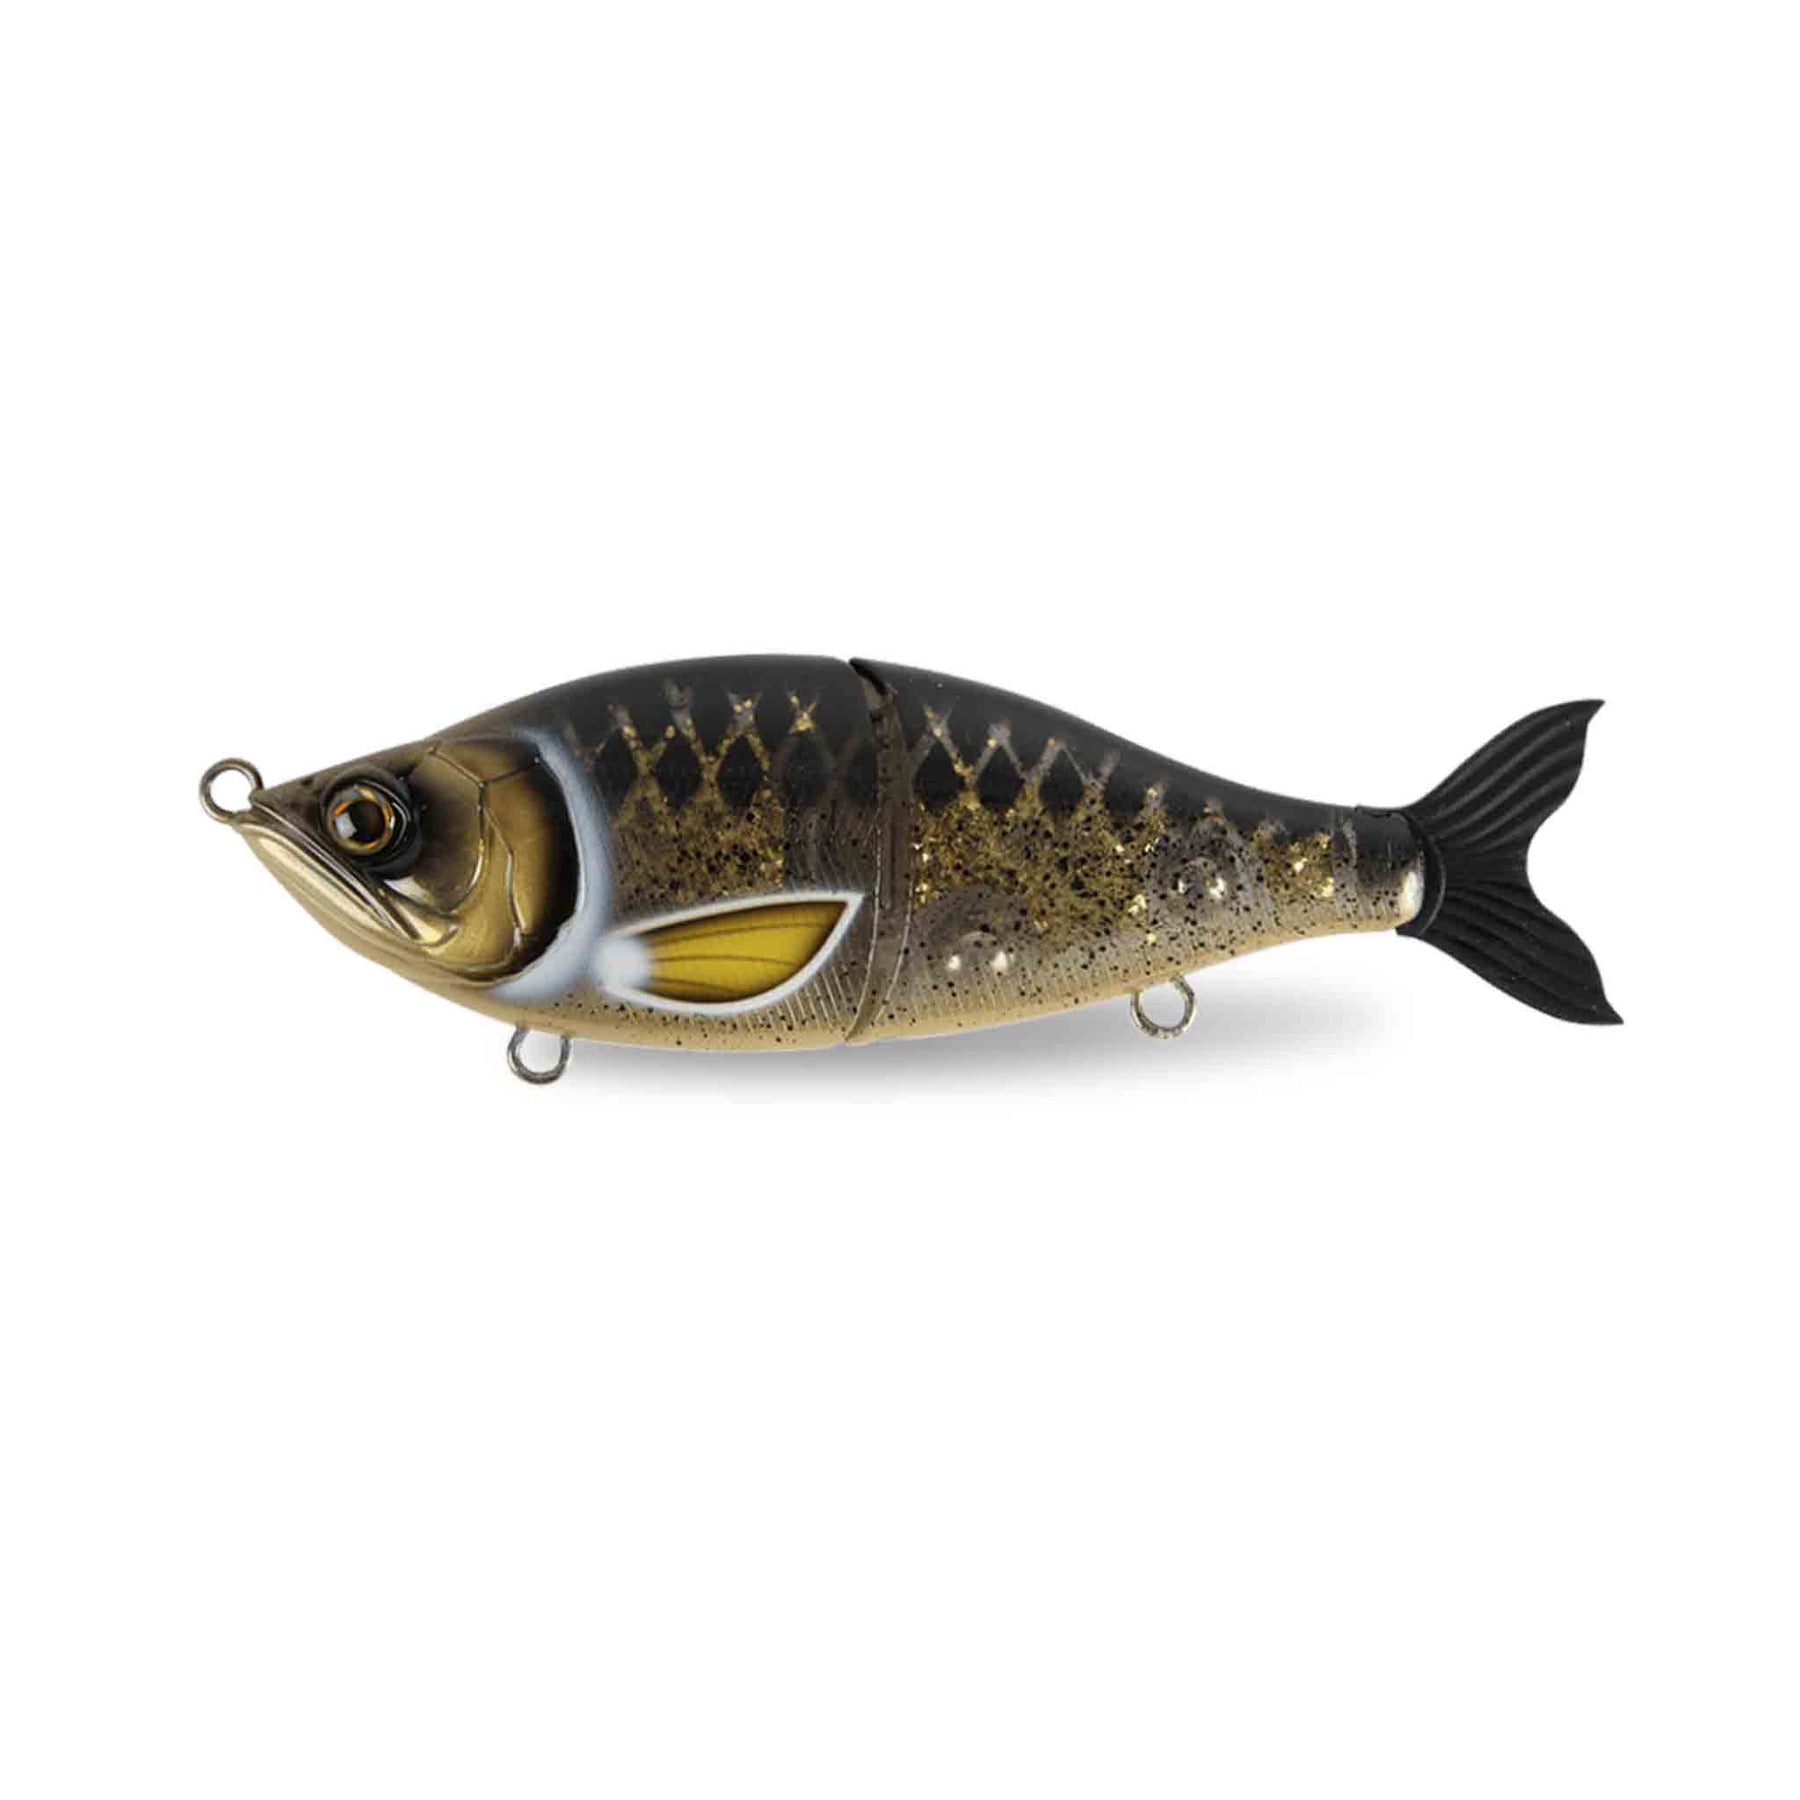 View of Swimbaits Strike Pro X-Buster Swimbait Spotted Bullhead available at EZOKO Pike and Musky Shop